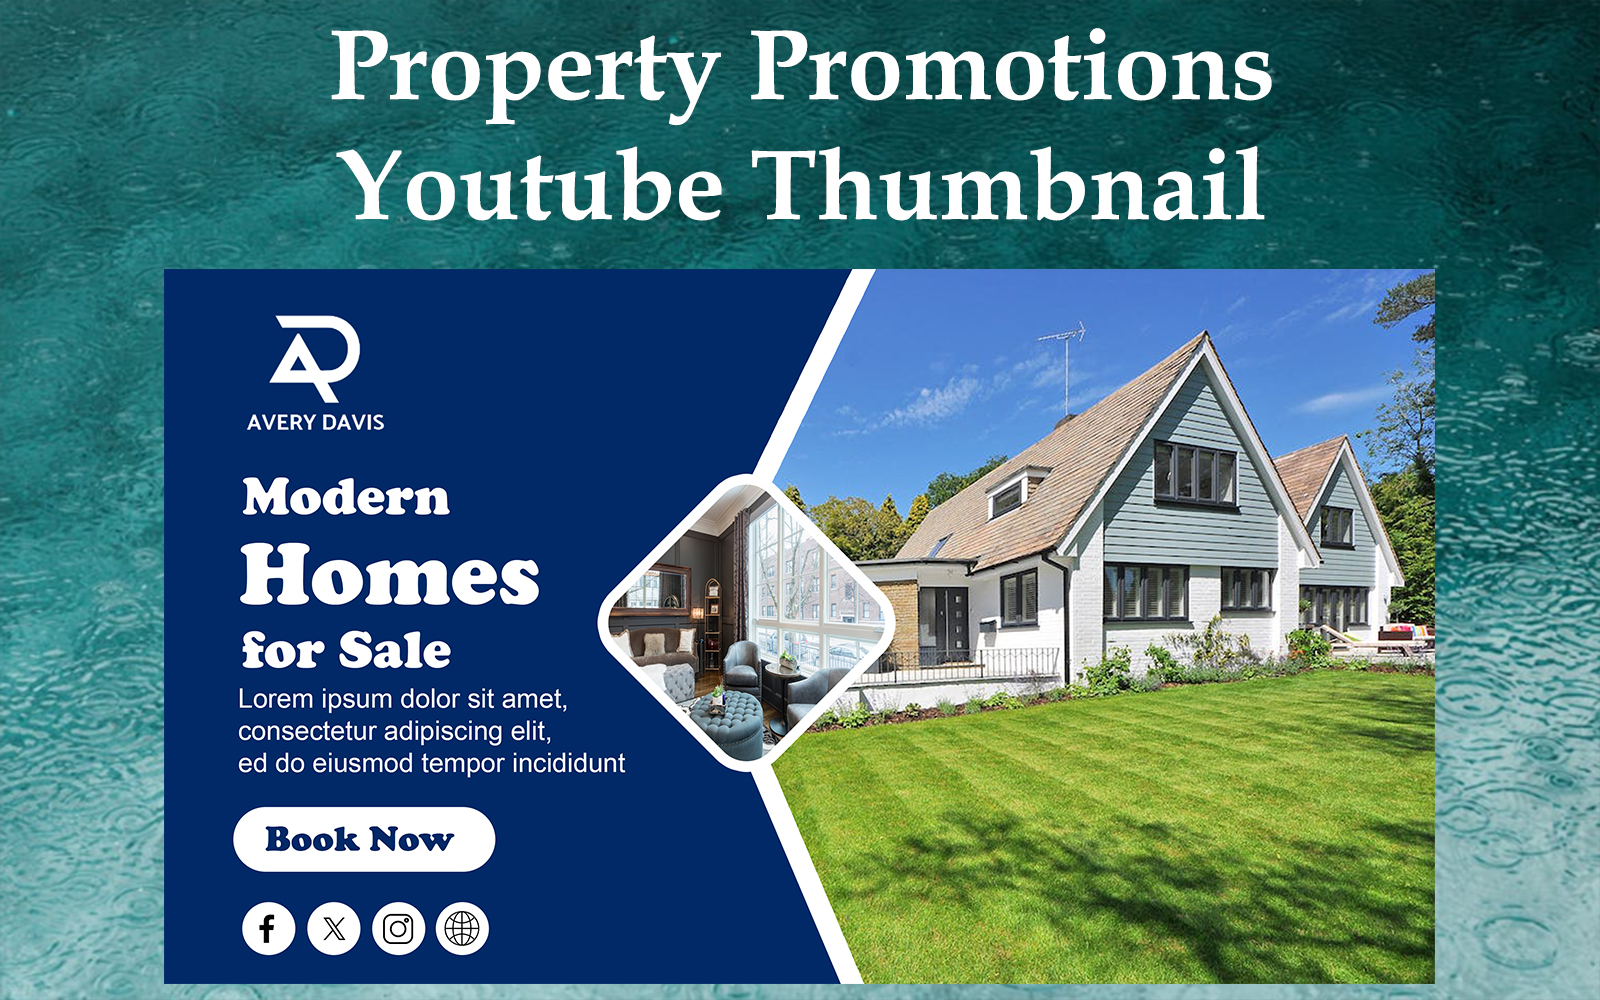 Elevate your property promotions - YouTube Thumbnail - 010